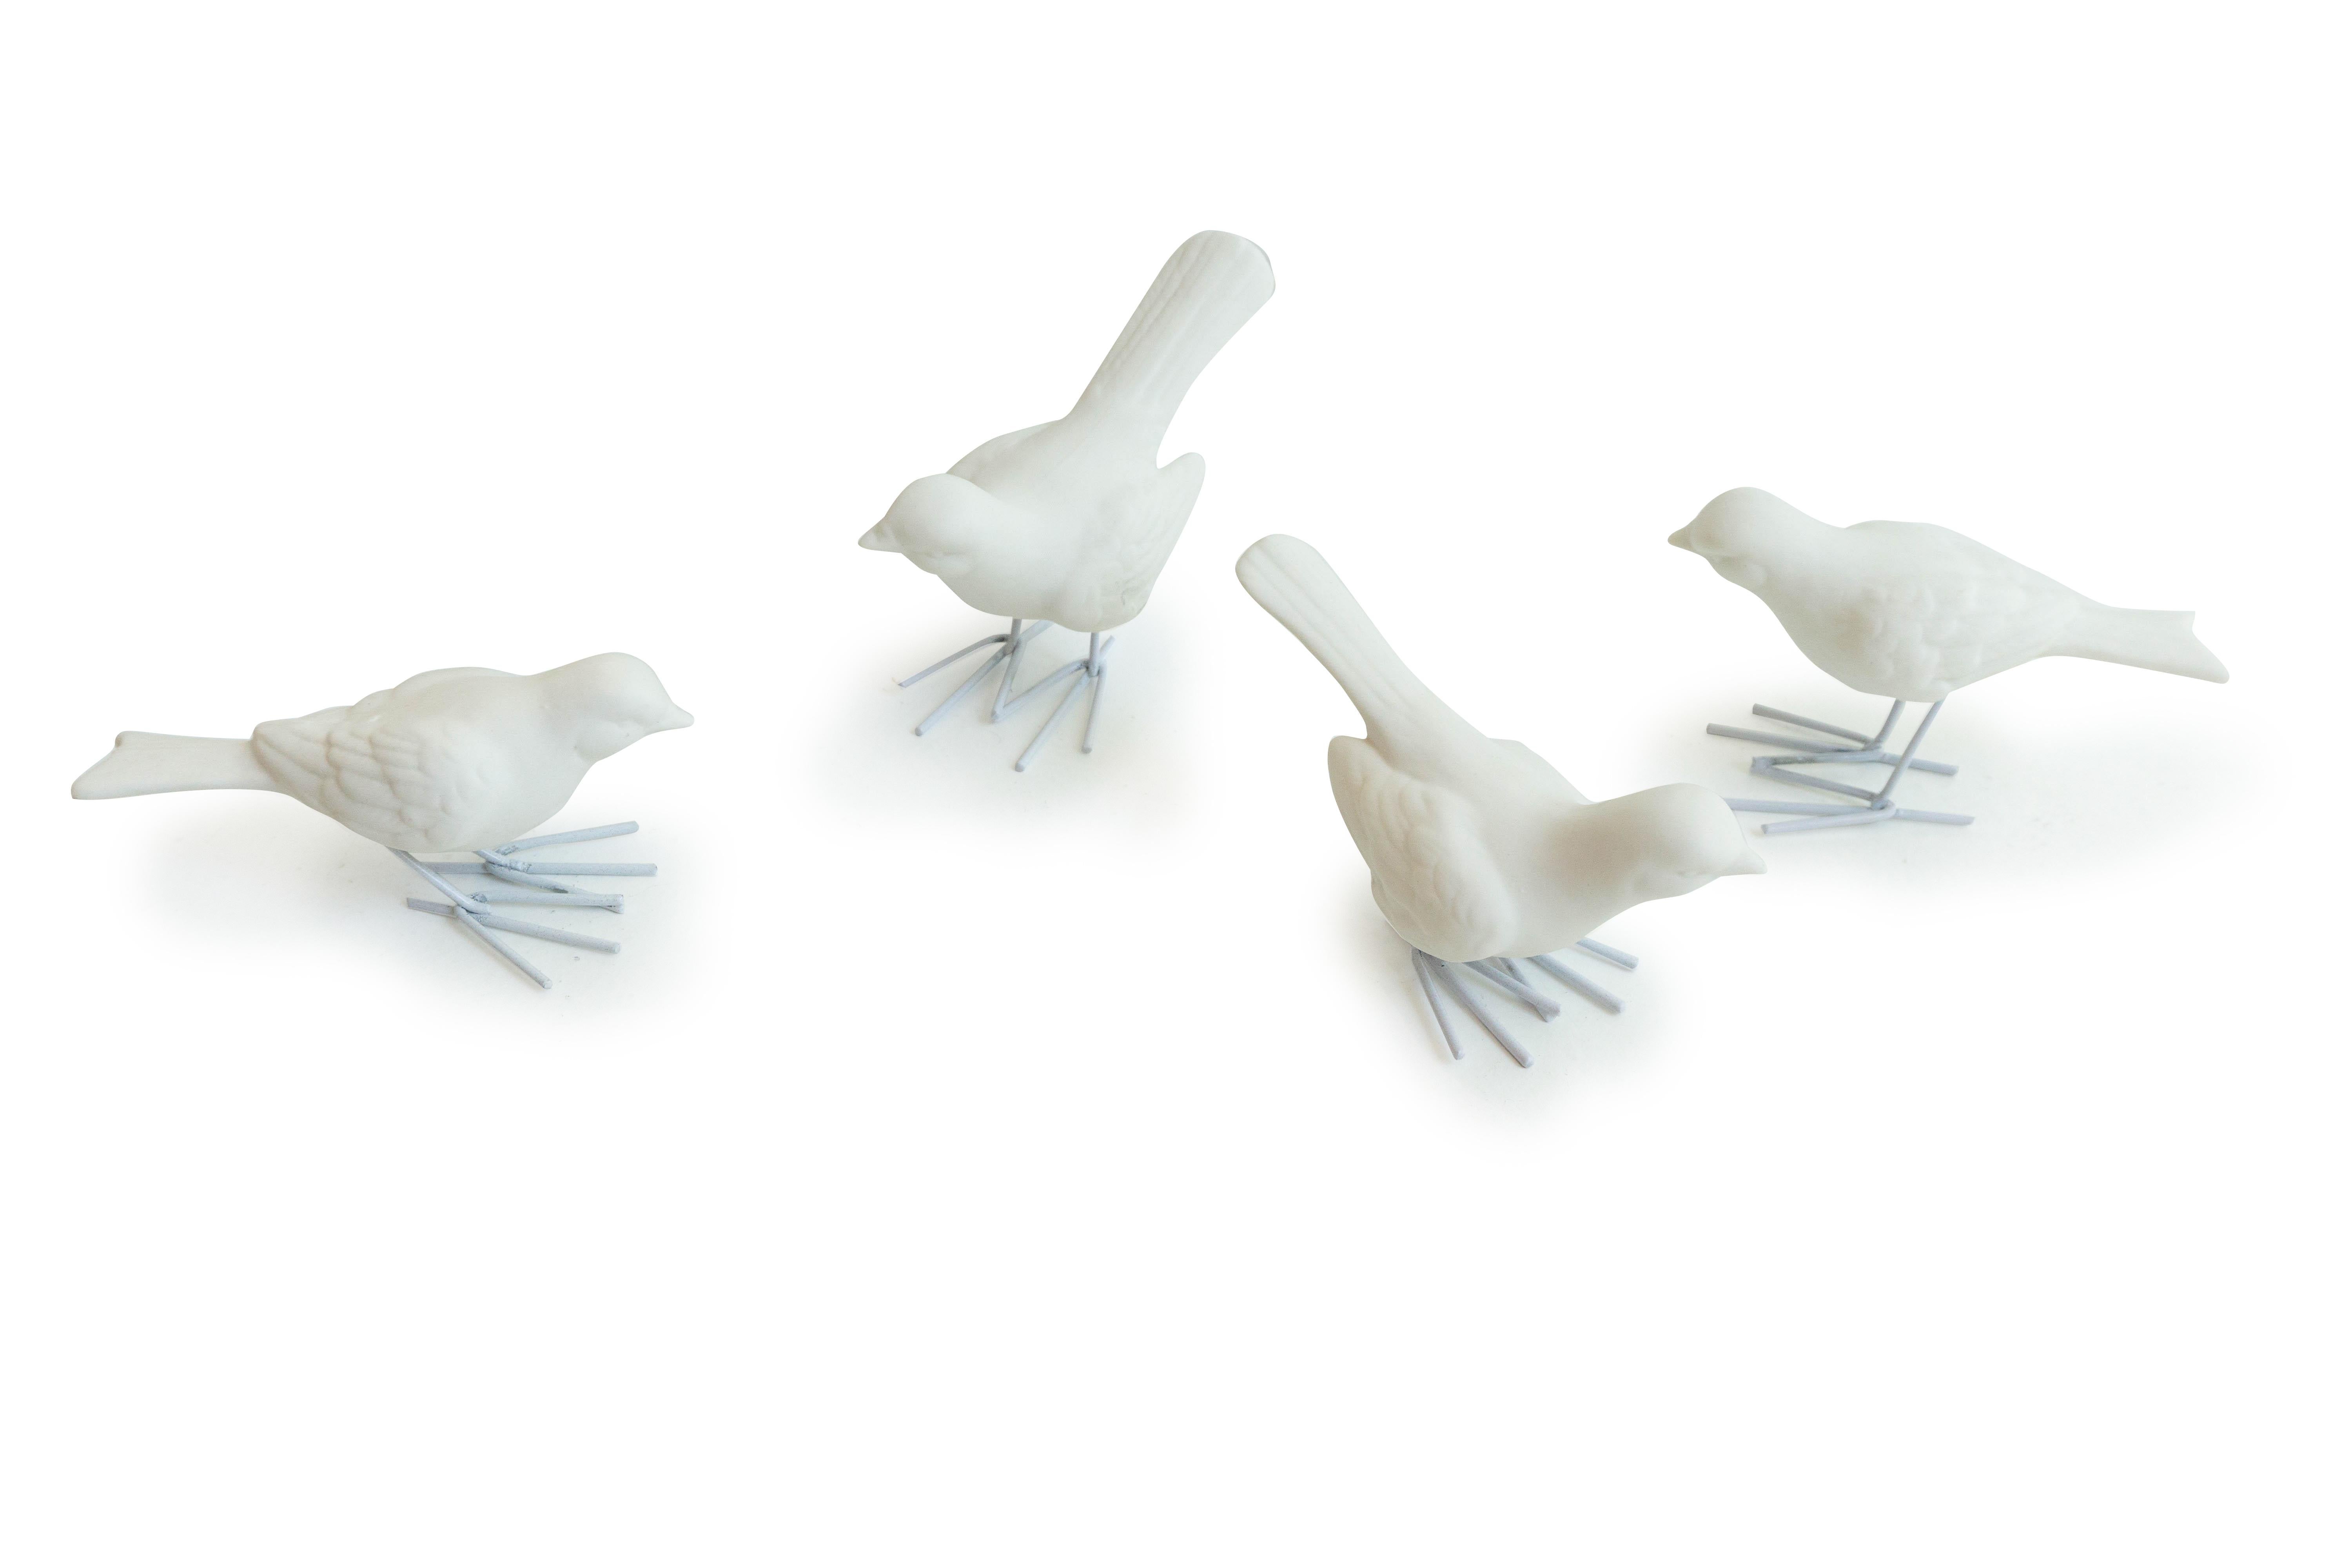 A set of four unglazed white porcelain starlings with iron legs. Perched throughout your space for a year round decoration. 

Dimensions: 5” H x 2” W x 4” L.